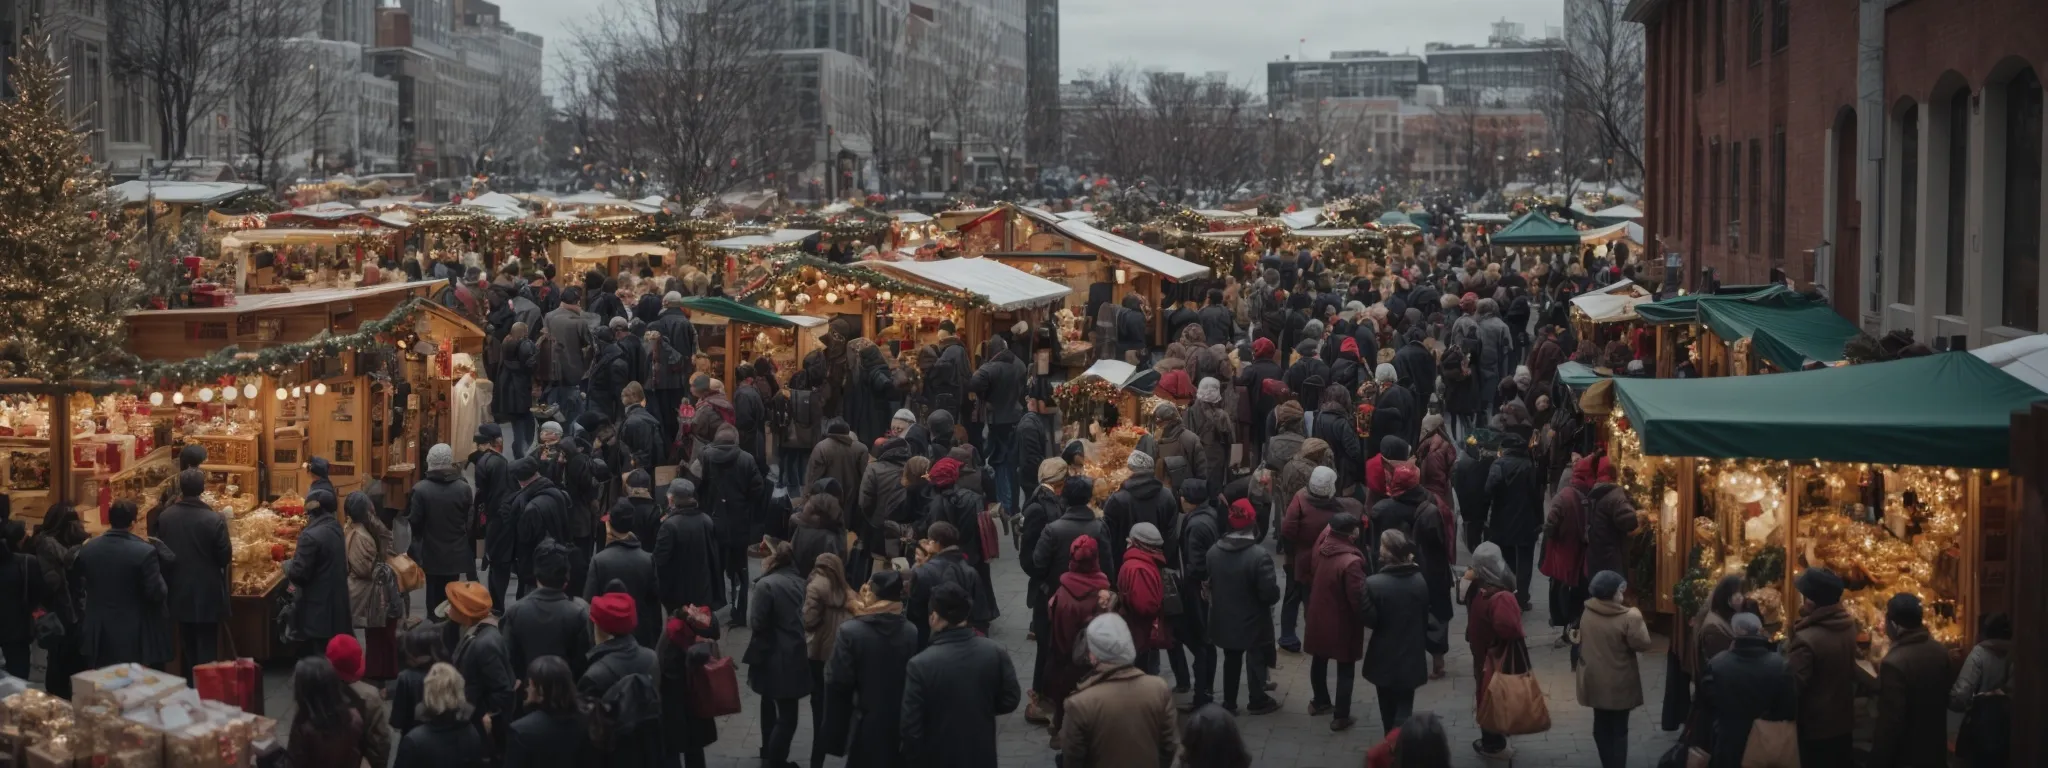 a bustling holiday market with festive decorations and eager shoppers.